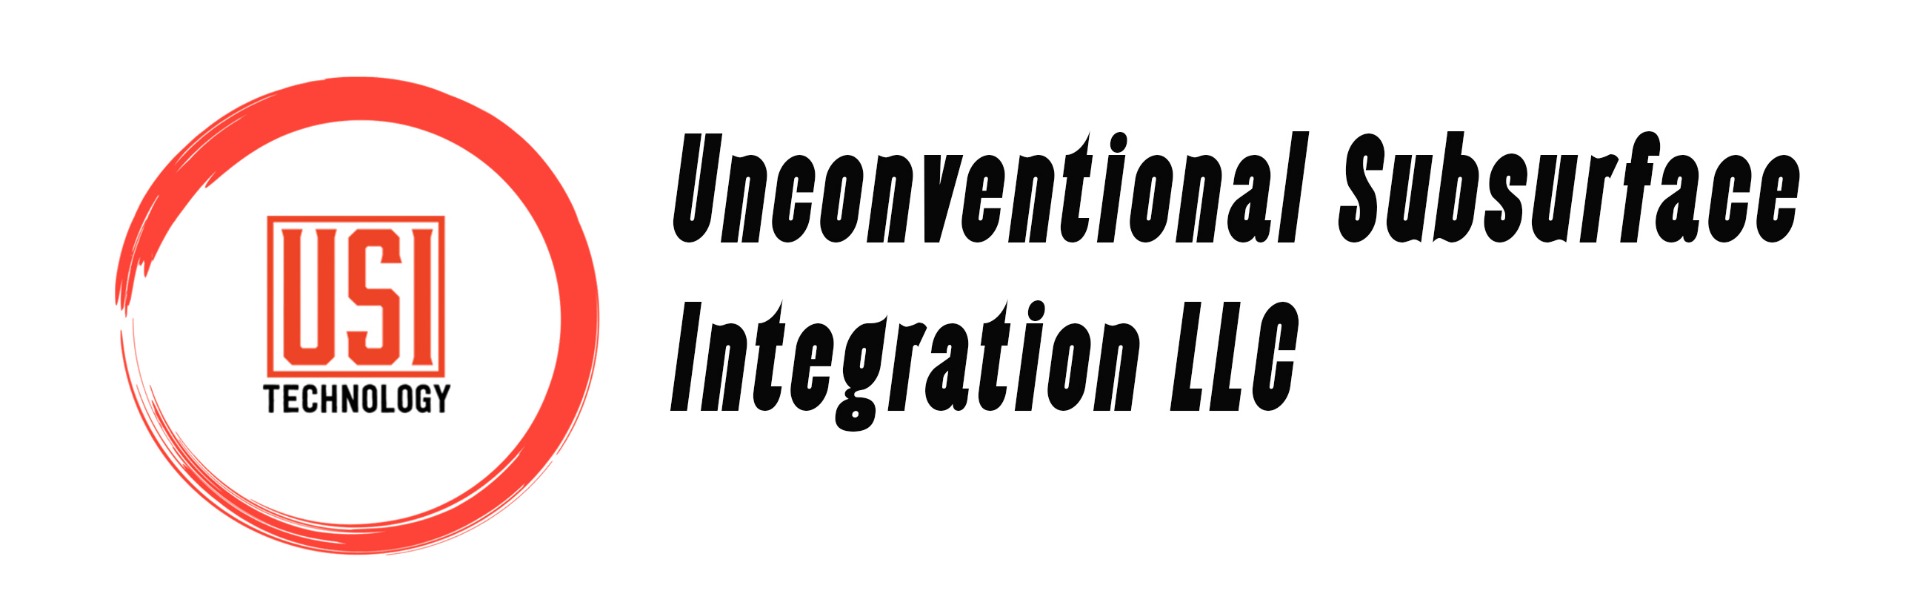 unconventional-subsurface-integration-llc